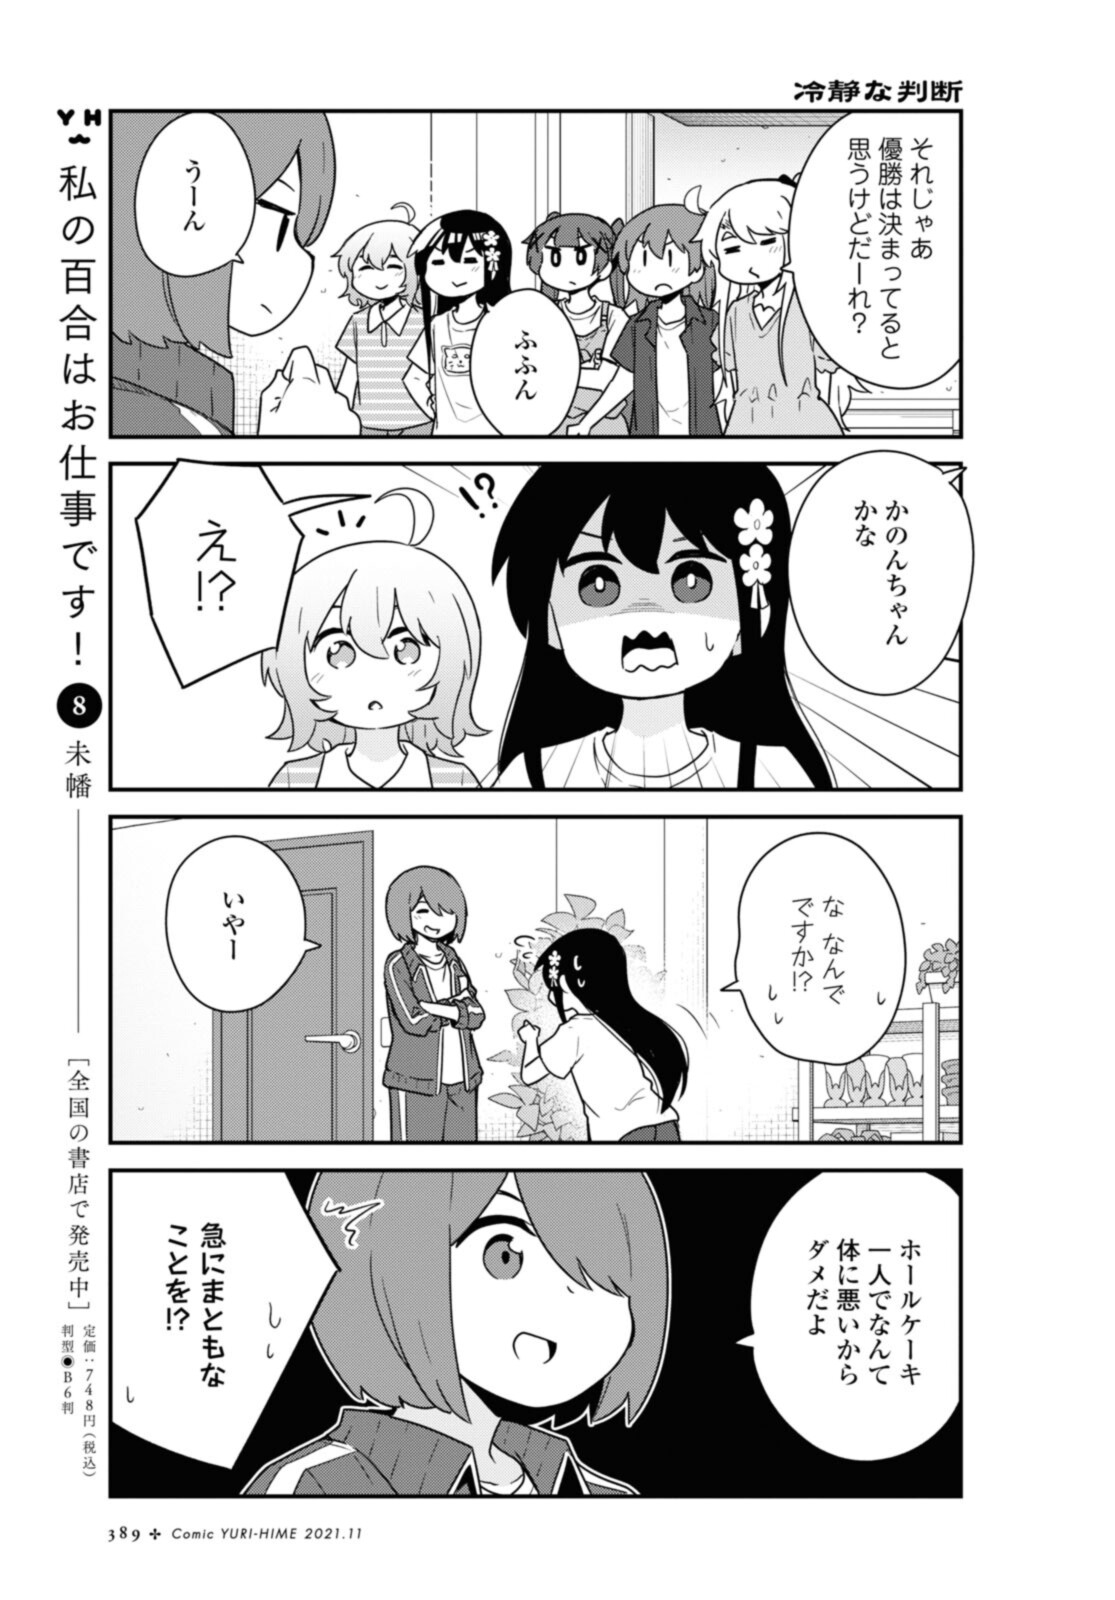 Wataten! An Angel Flew Down to Me 私に天使が舞い降りた！ 第88話 - Page 2